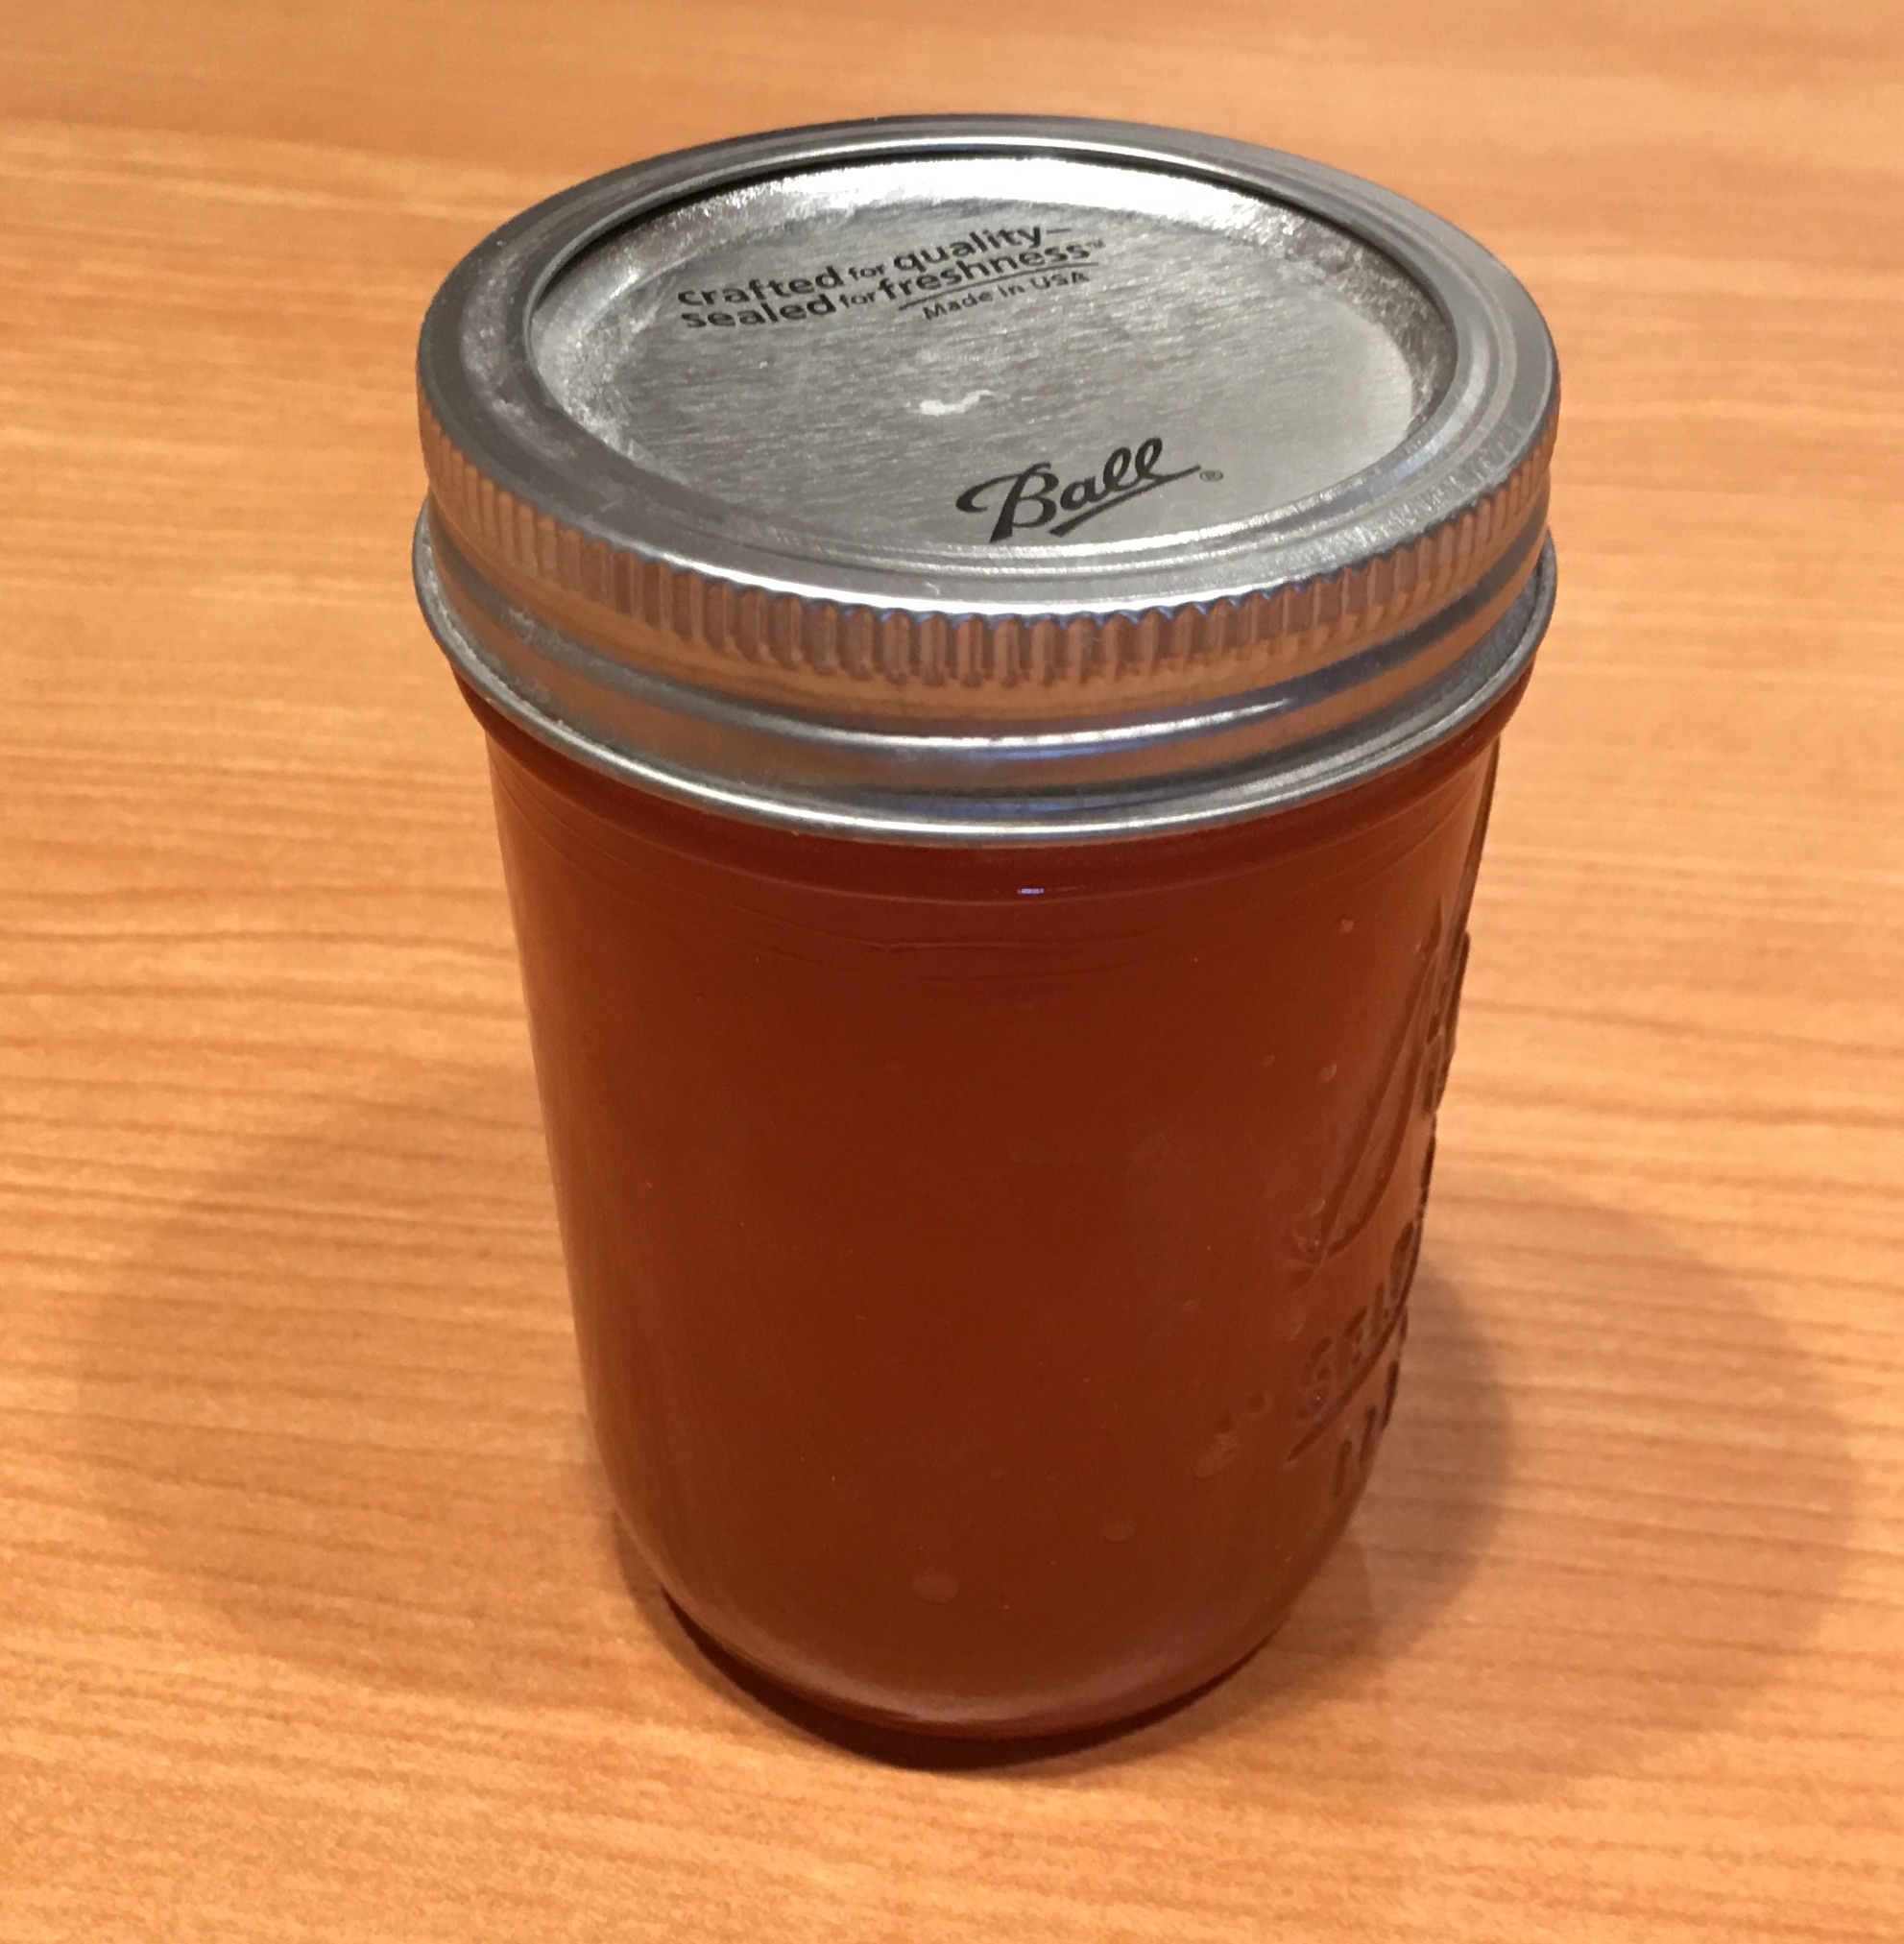 A jar of my double-trouble habanero jelly. You wanted the best, now you got the best